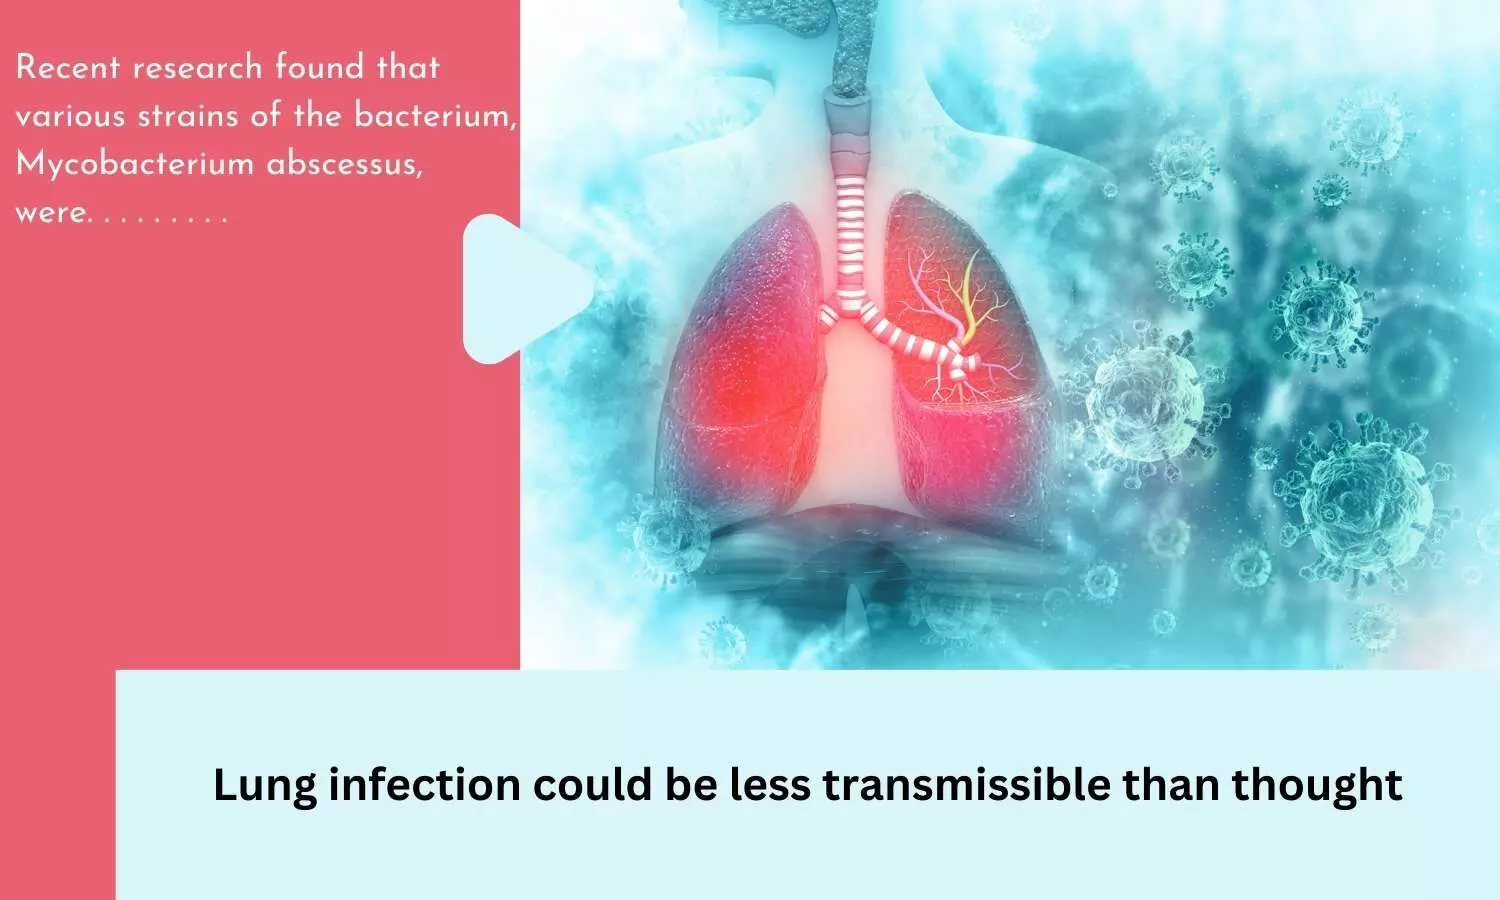 Lung infection could be less transmissible than thought